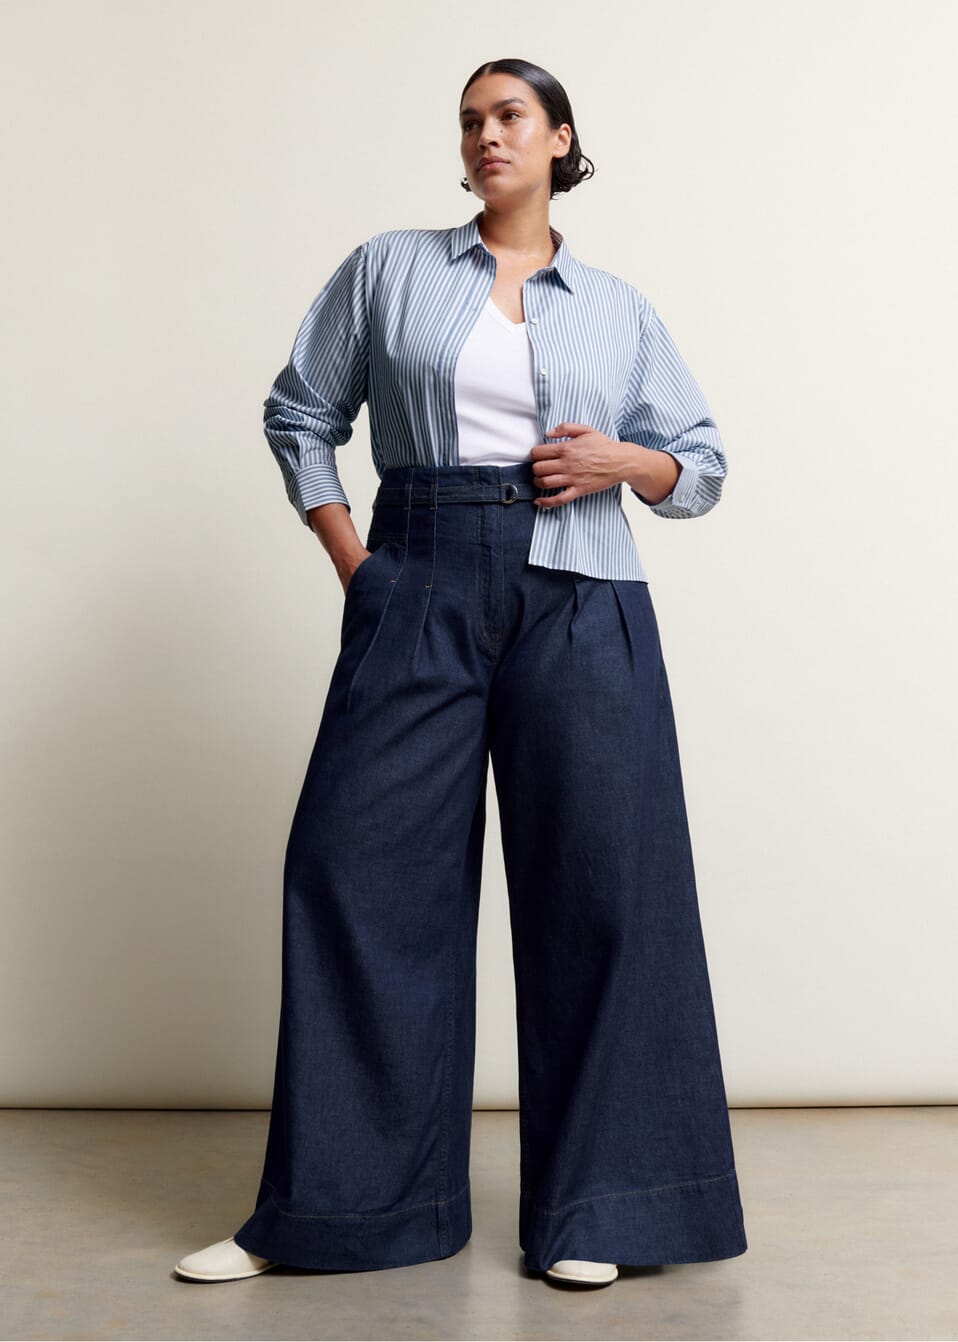 The ultimate staple for your capsule wardrobe. Both polished and practical, this jean is crafted from Italian cotton denim in a dark wash for wear-with-everything versatility, whilst the relaxed super wide-leg silhouette is elevated by pleated detailing at the waist for a seamless, streamlined silhouette.